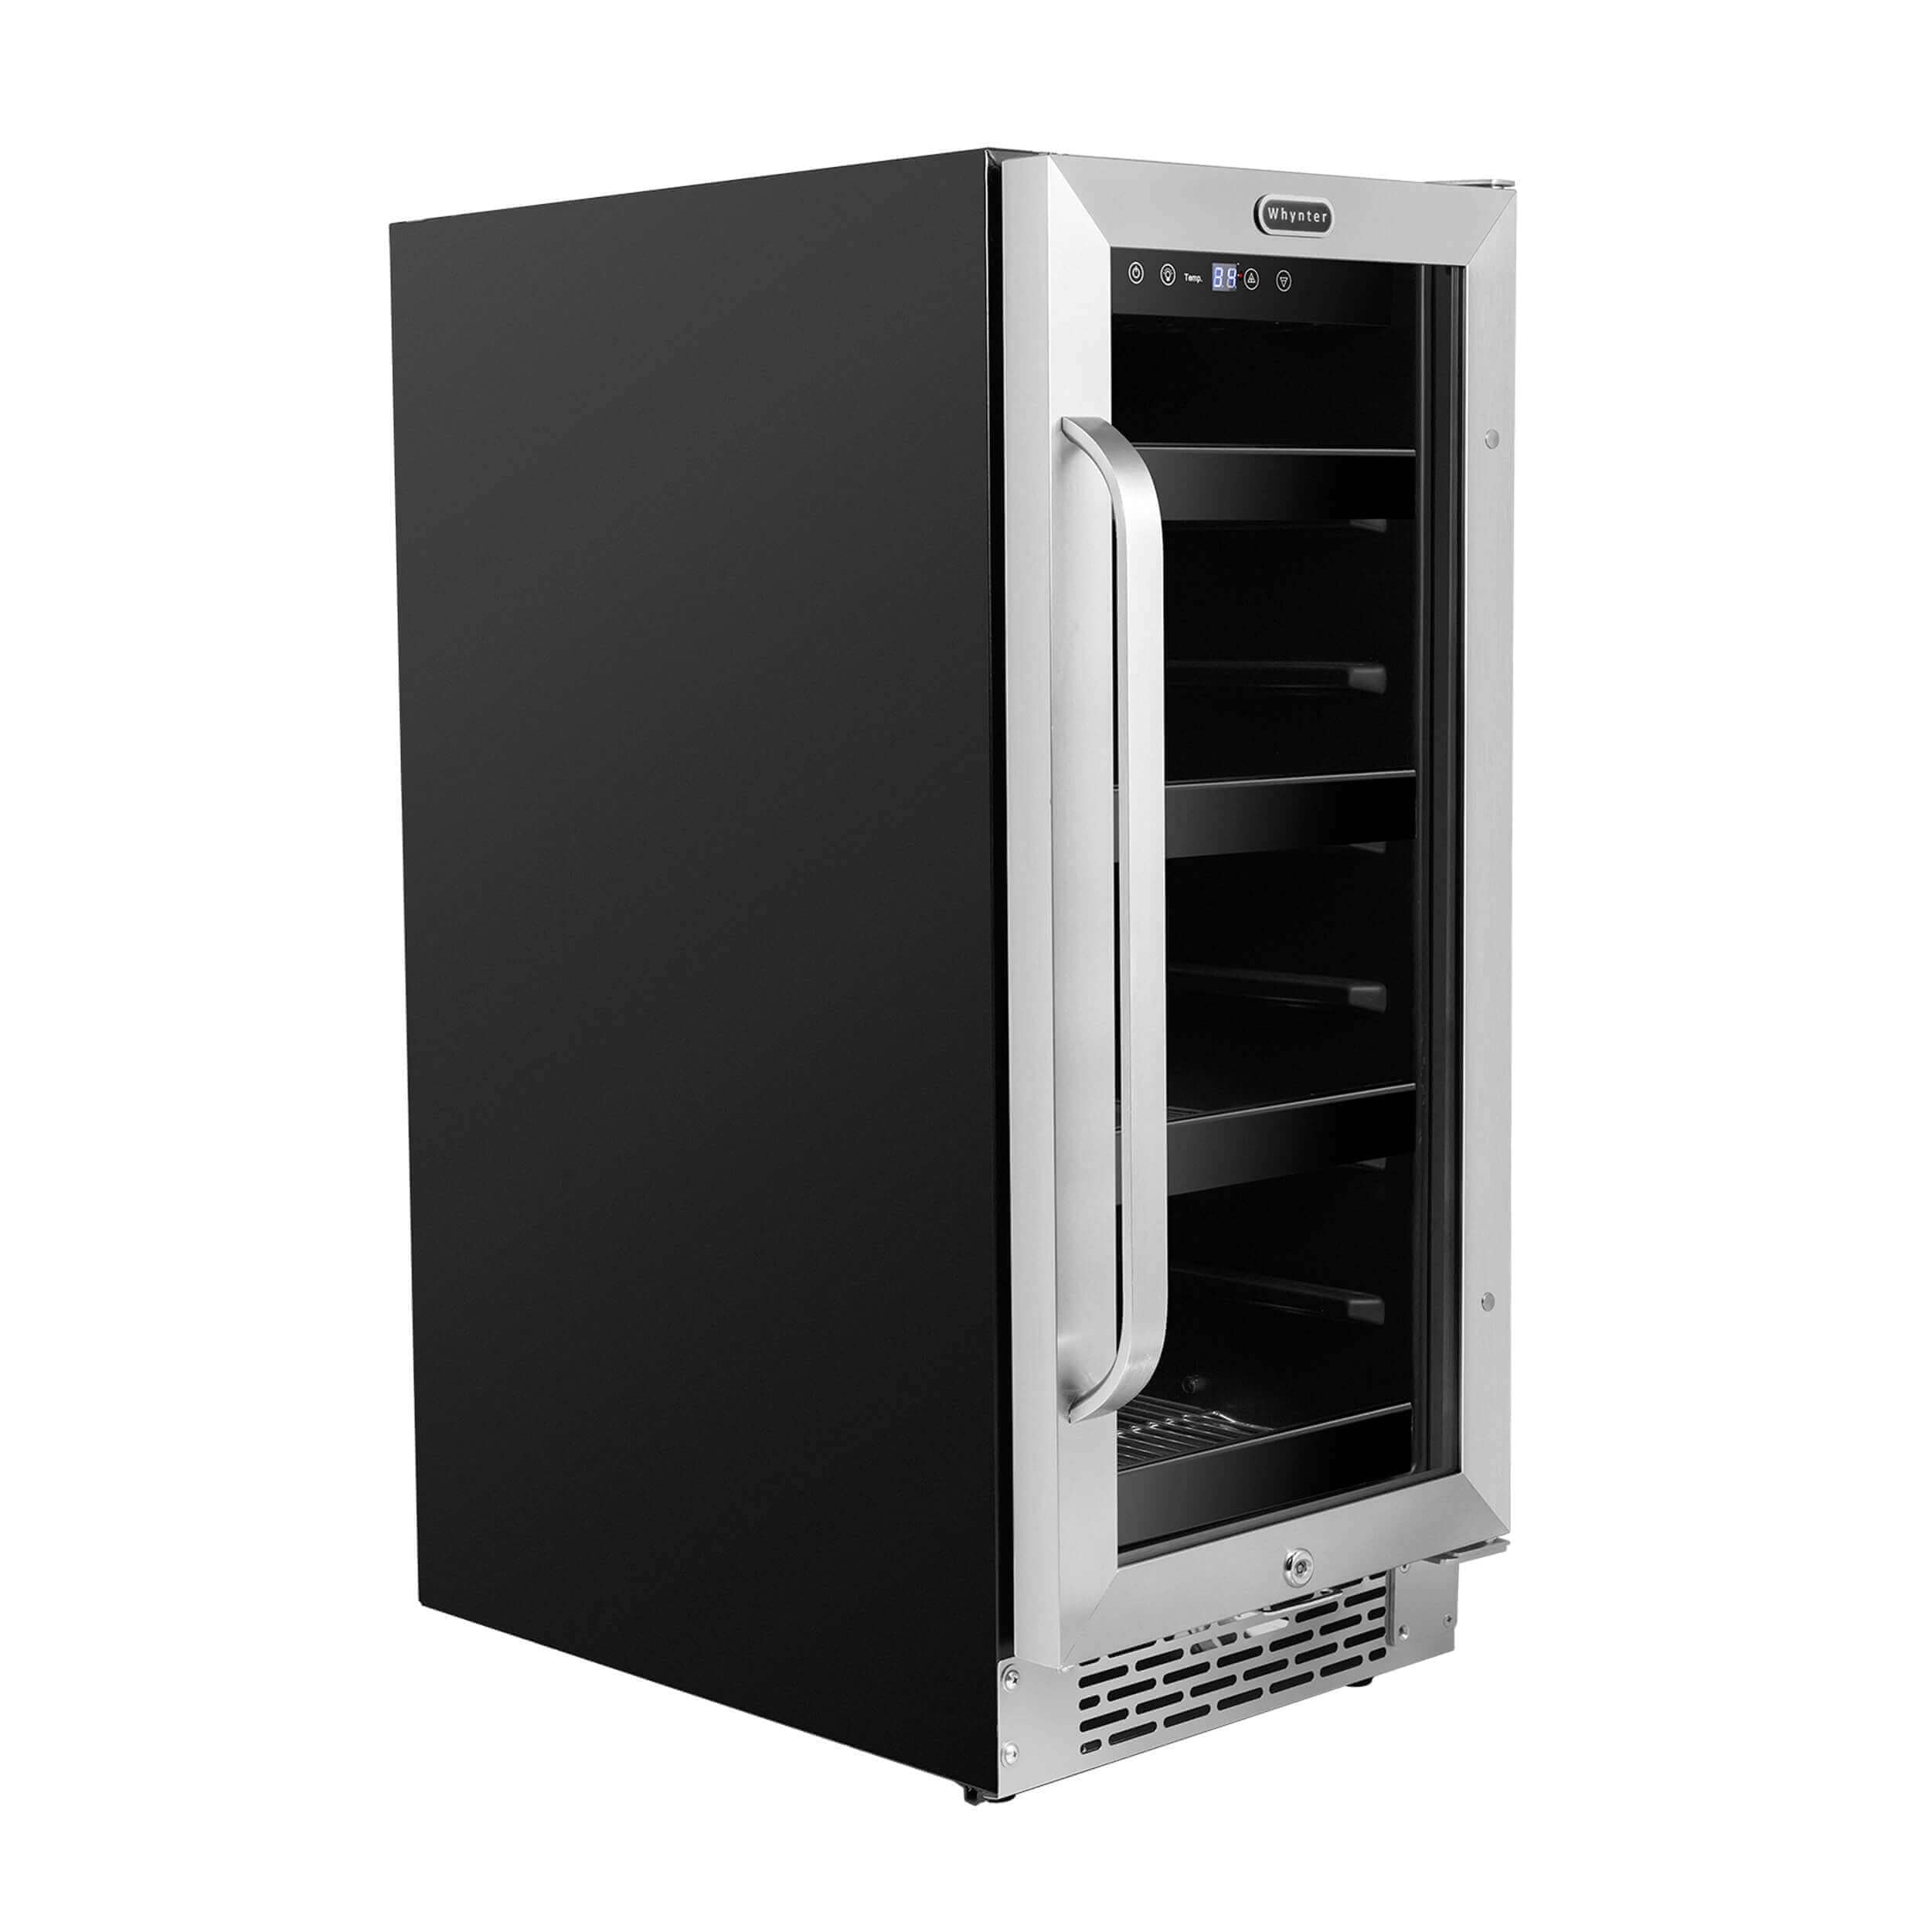 Whynter Whynter BBR-838SB 15 inch Built-In 80 Can Undercounter Stainless Steel Beverage Refrigerator with Reversible Door, Digital Control, Lock and Carbon Filter